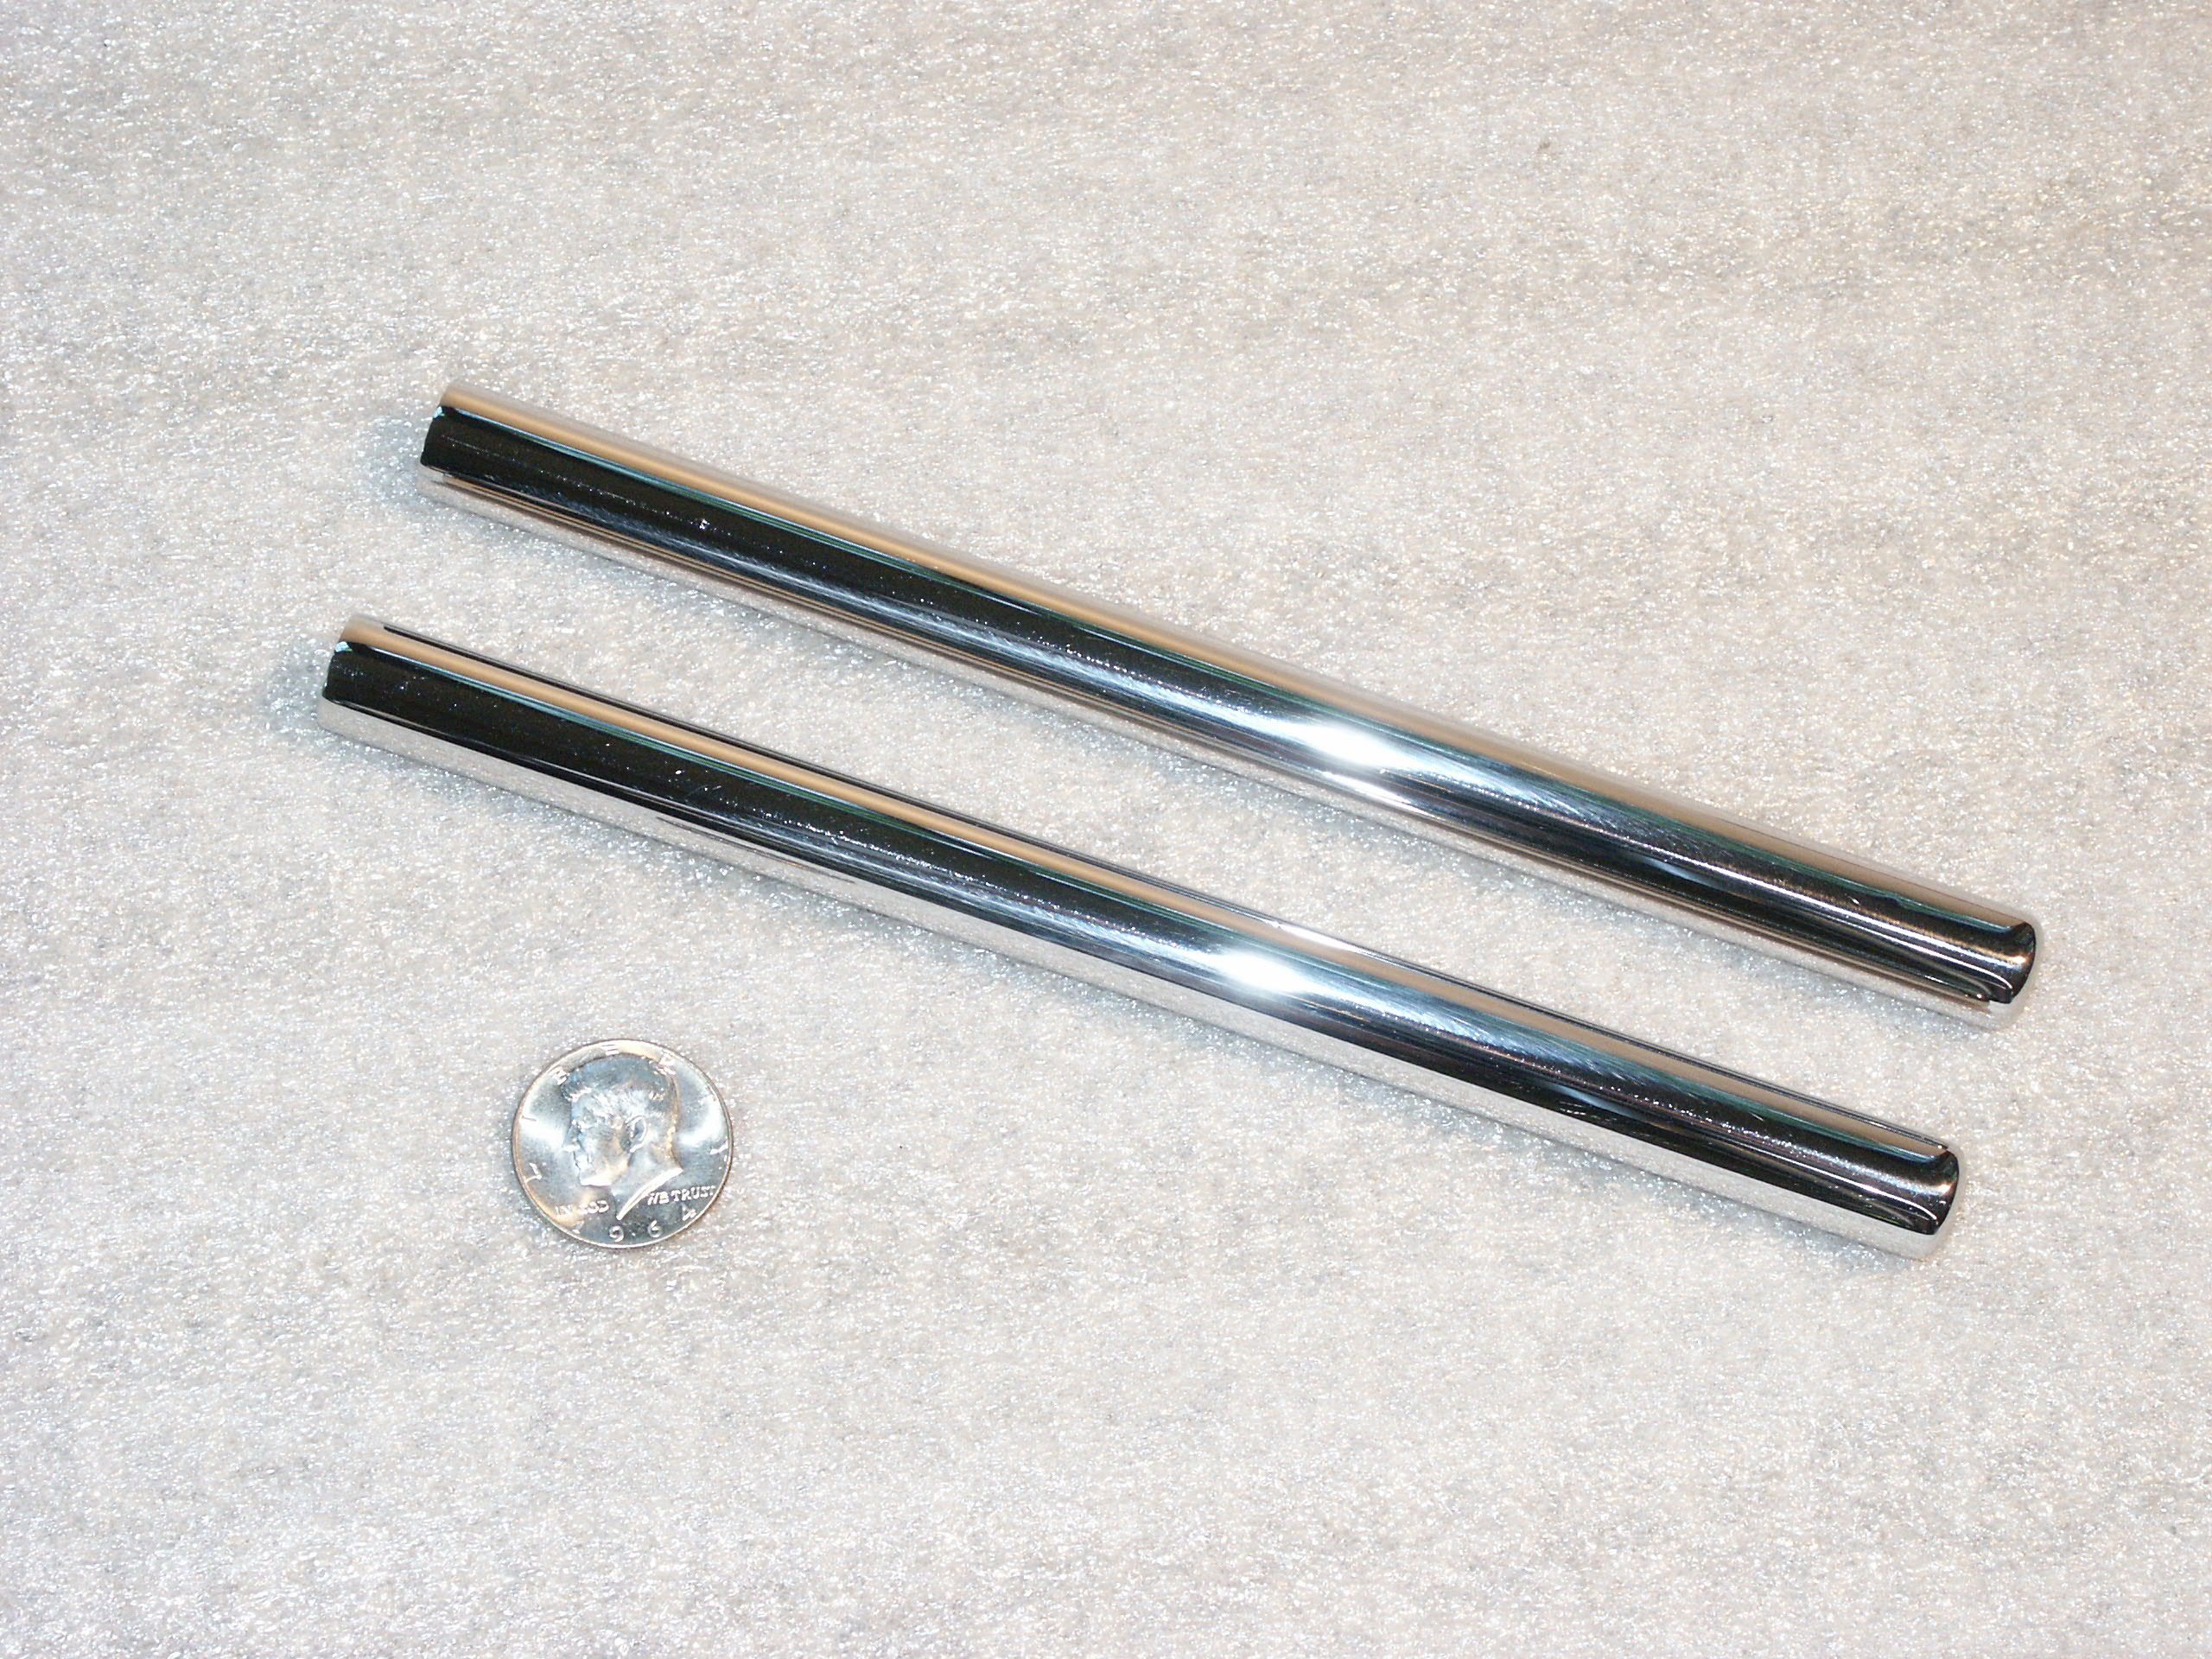 Bright stainless Strut Covers for PT Convertible